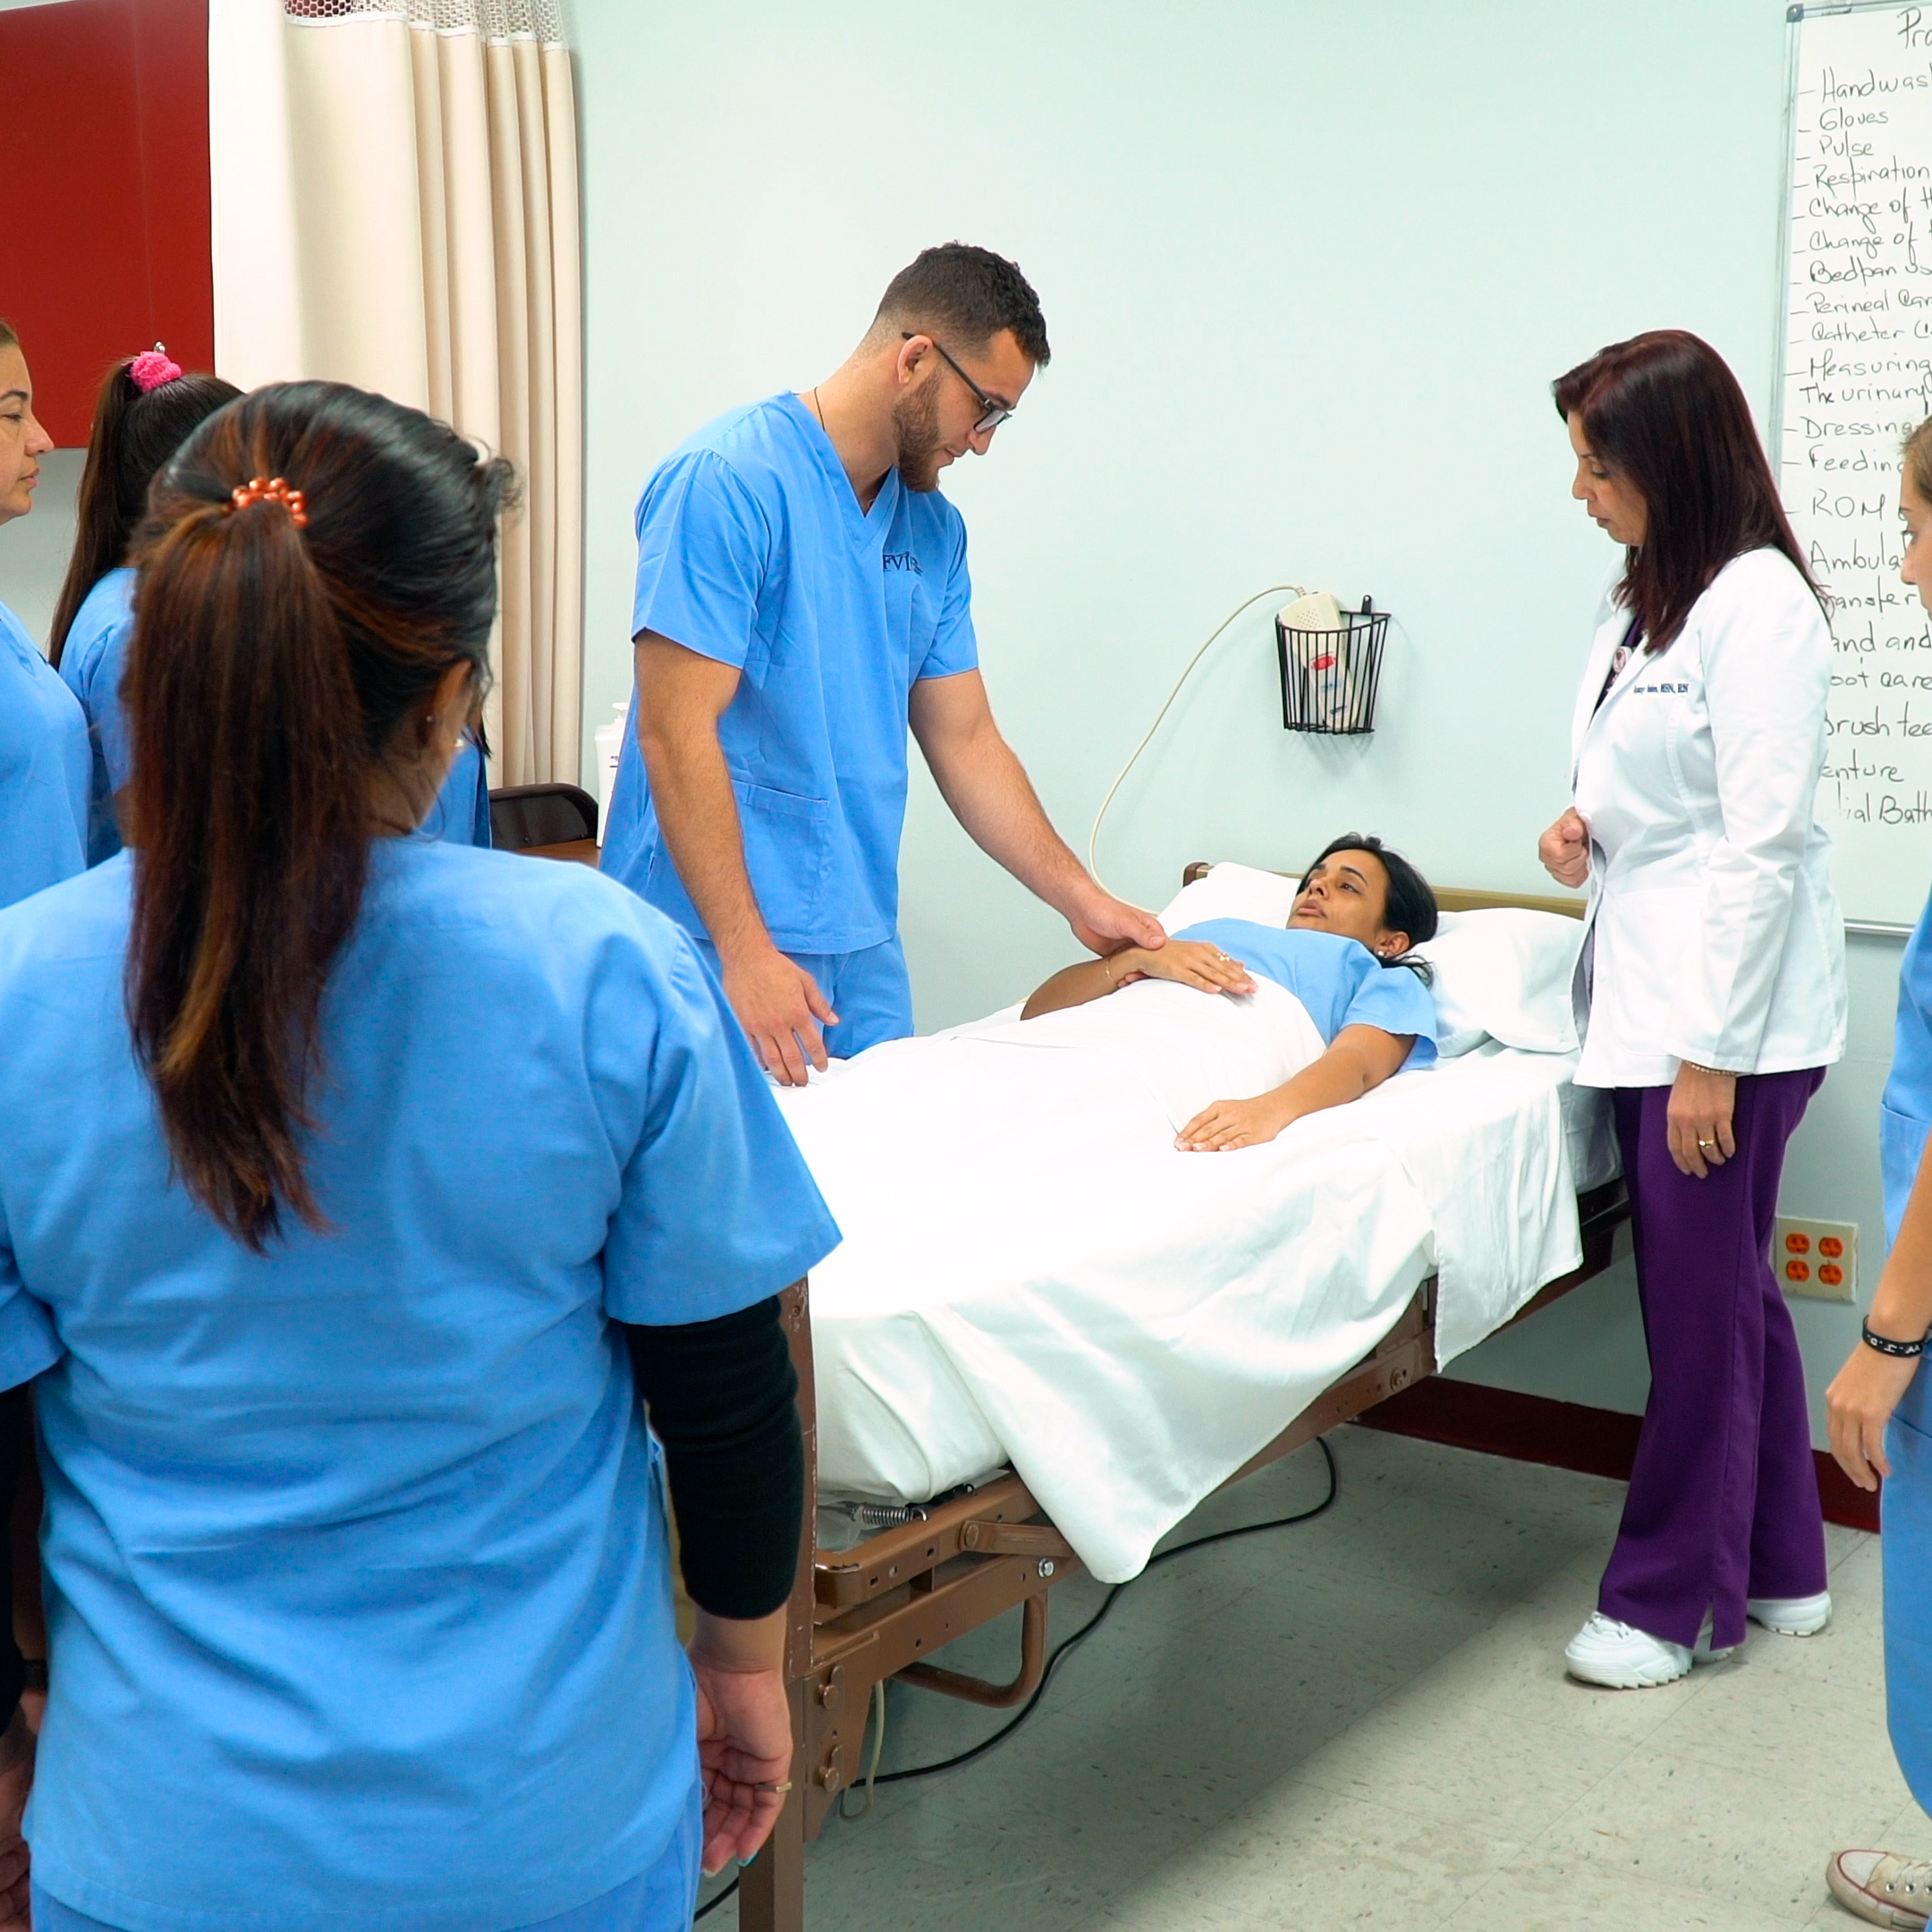 Students gather around a medical simulation with a faculty member